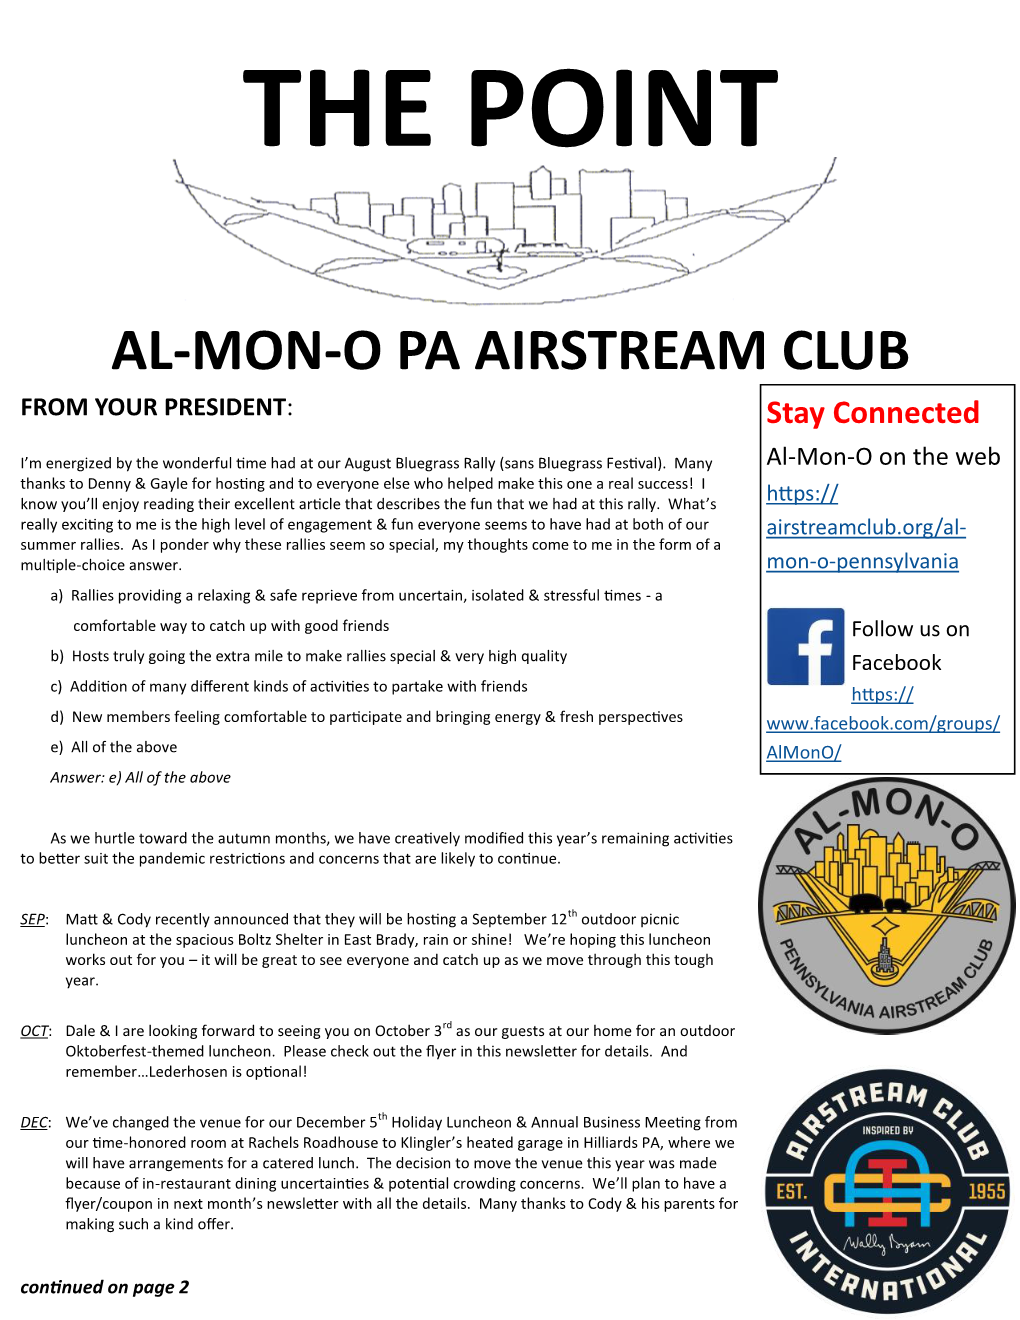 AL-MON-O PA AIRSTREAM CLUB from YOUR PRESIDENT: Stay Connected